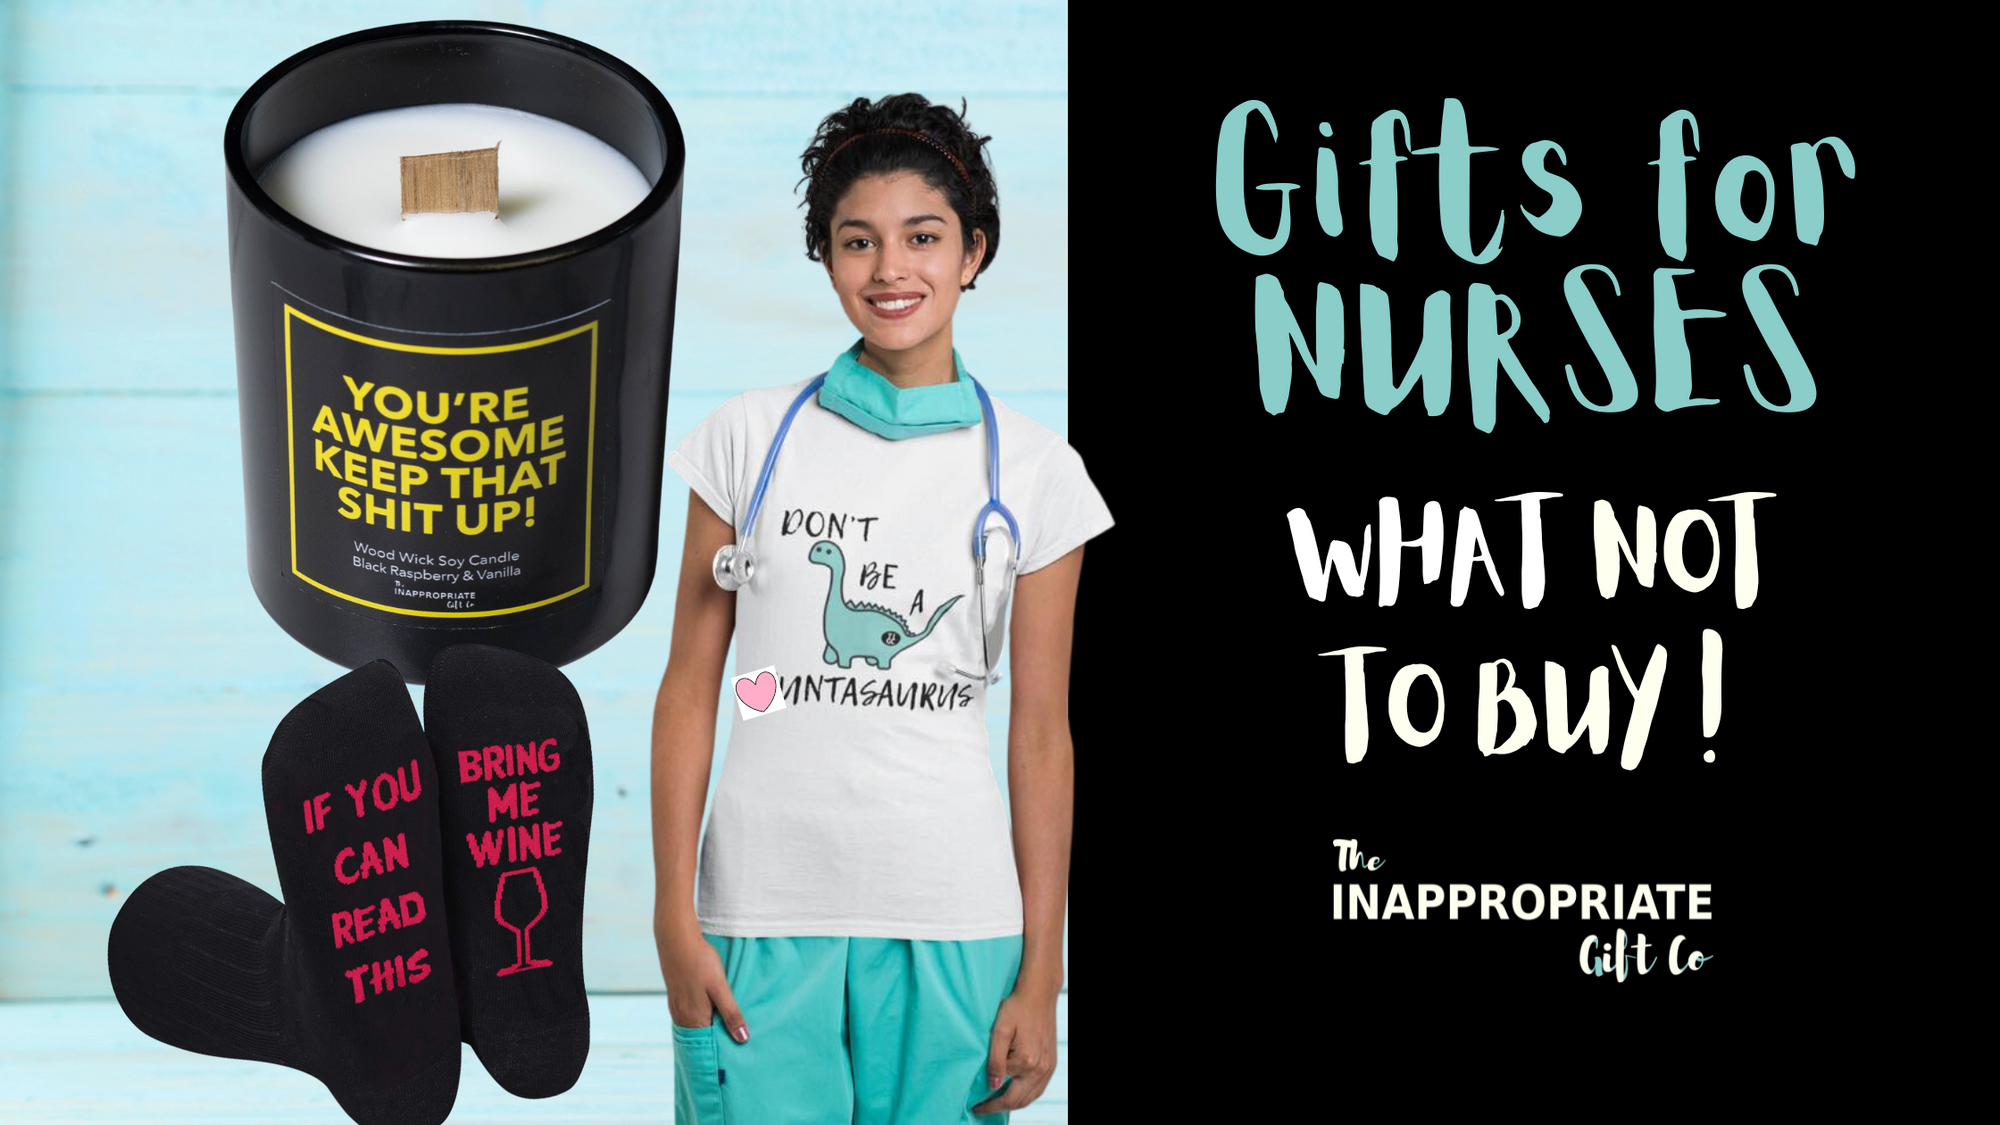 Nurse Gifts - Gifts NOT to buy a Nurse.